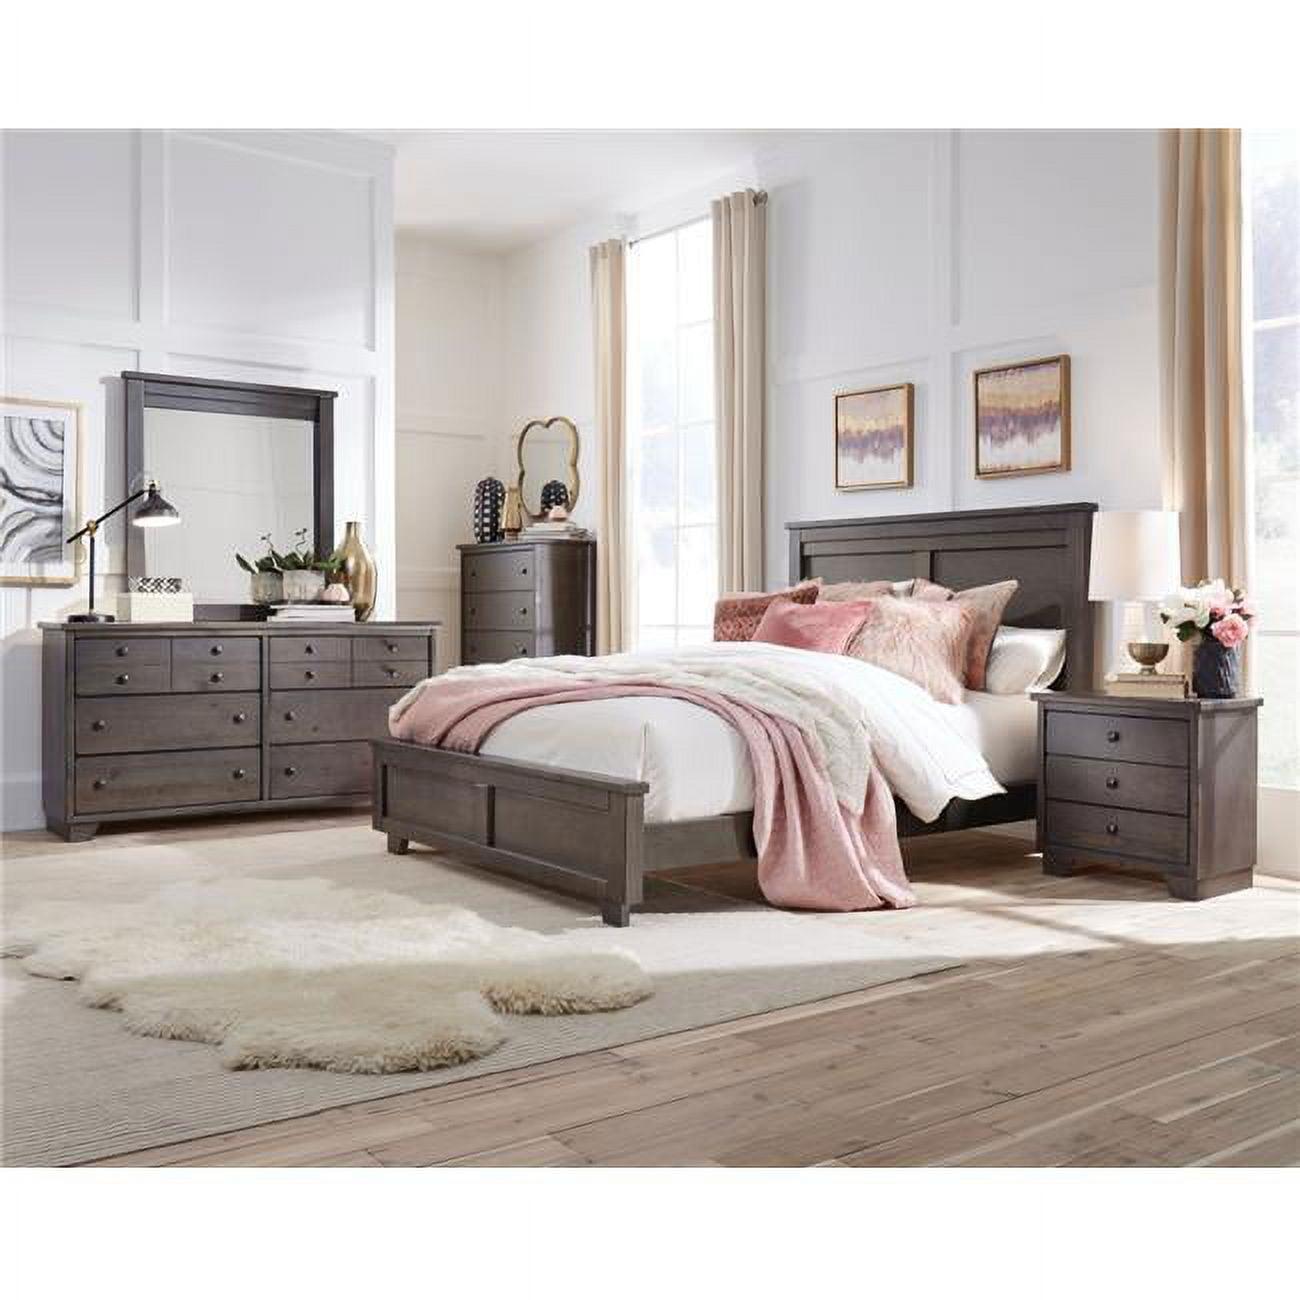 Transitional Storm Gray 6-Drawer Dresser with Framed Mirror